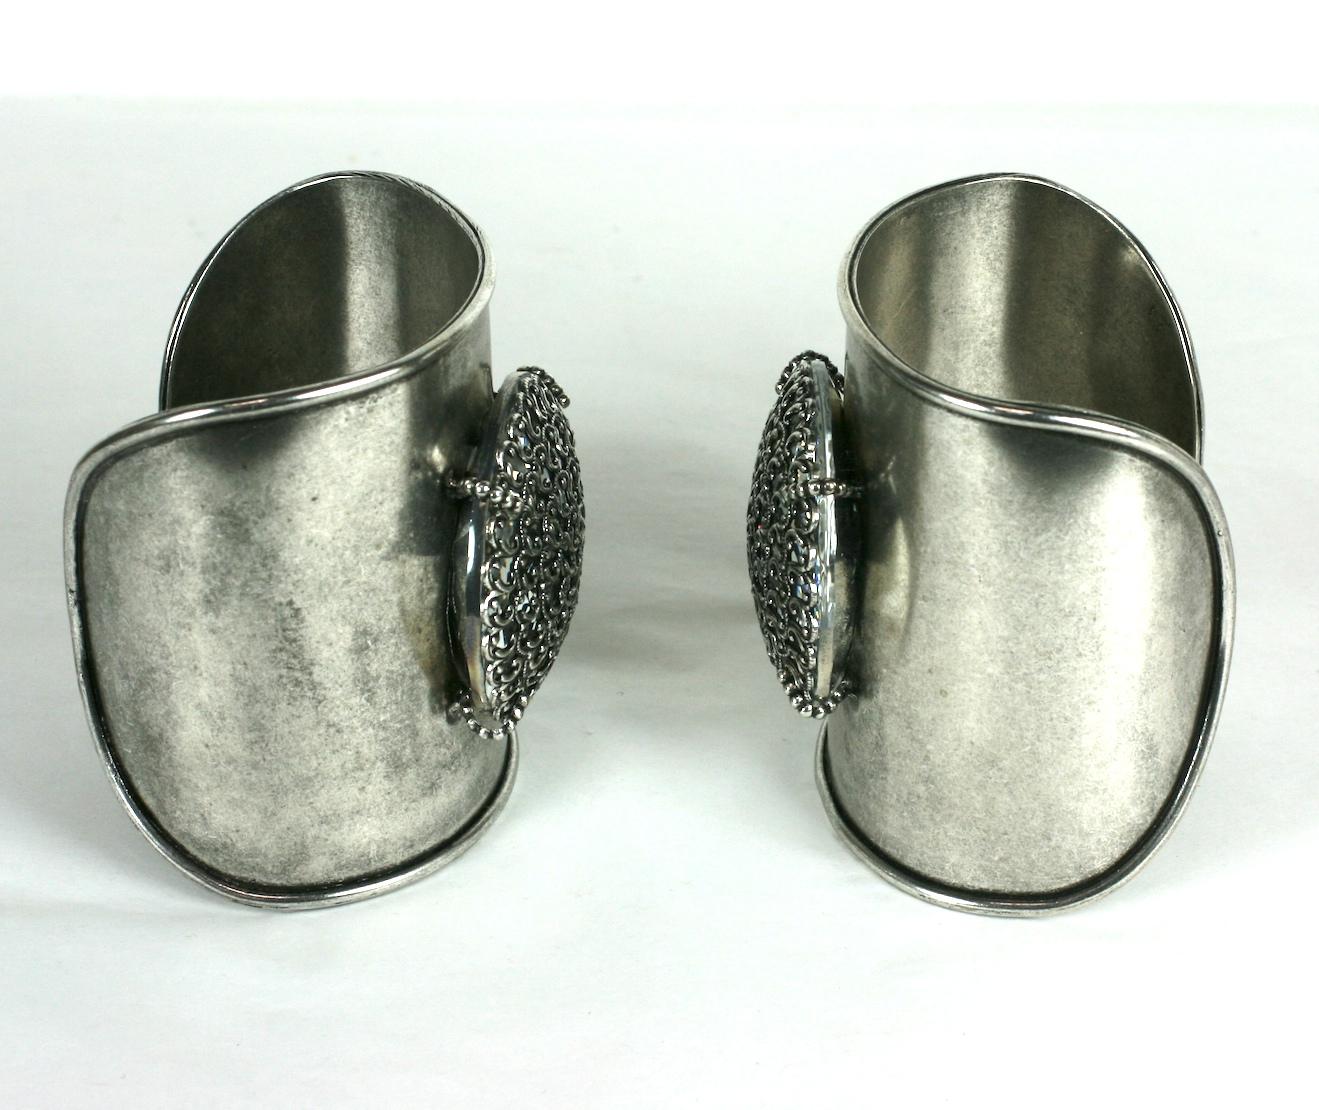 Maison Goossens for Yves Saint Laurent  Artisan Crystal Cuffs  In Excellent Condition For Sale In New York, NY